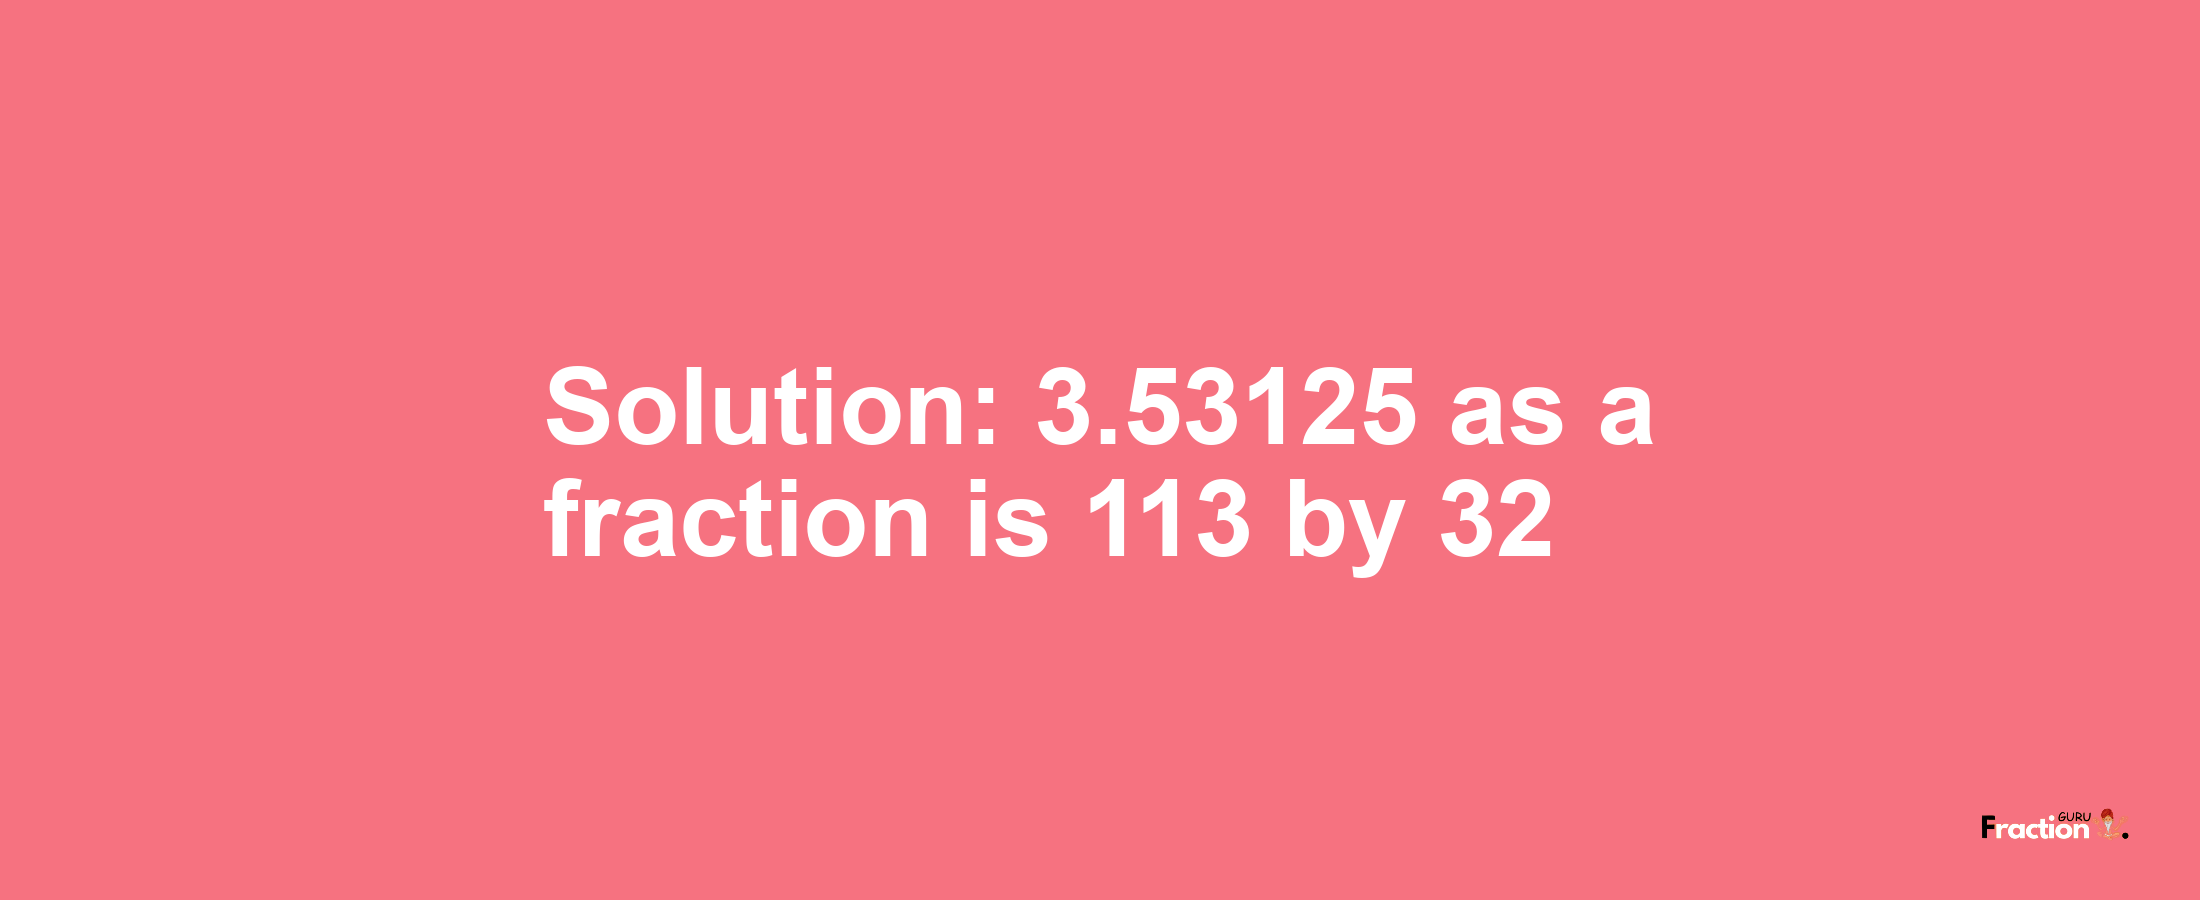 Solution:3.53125 as a fraction is 113/32